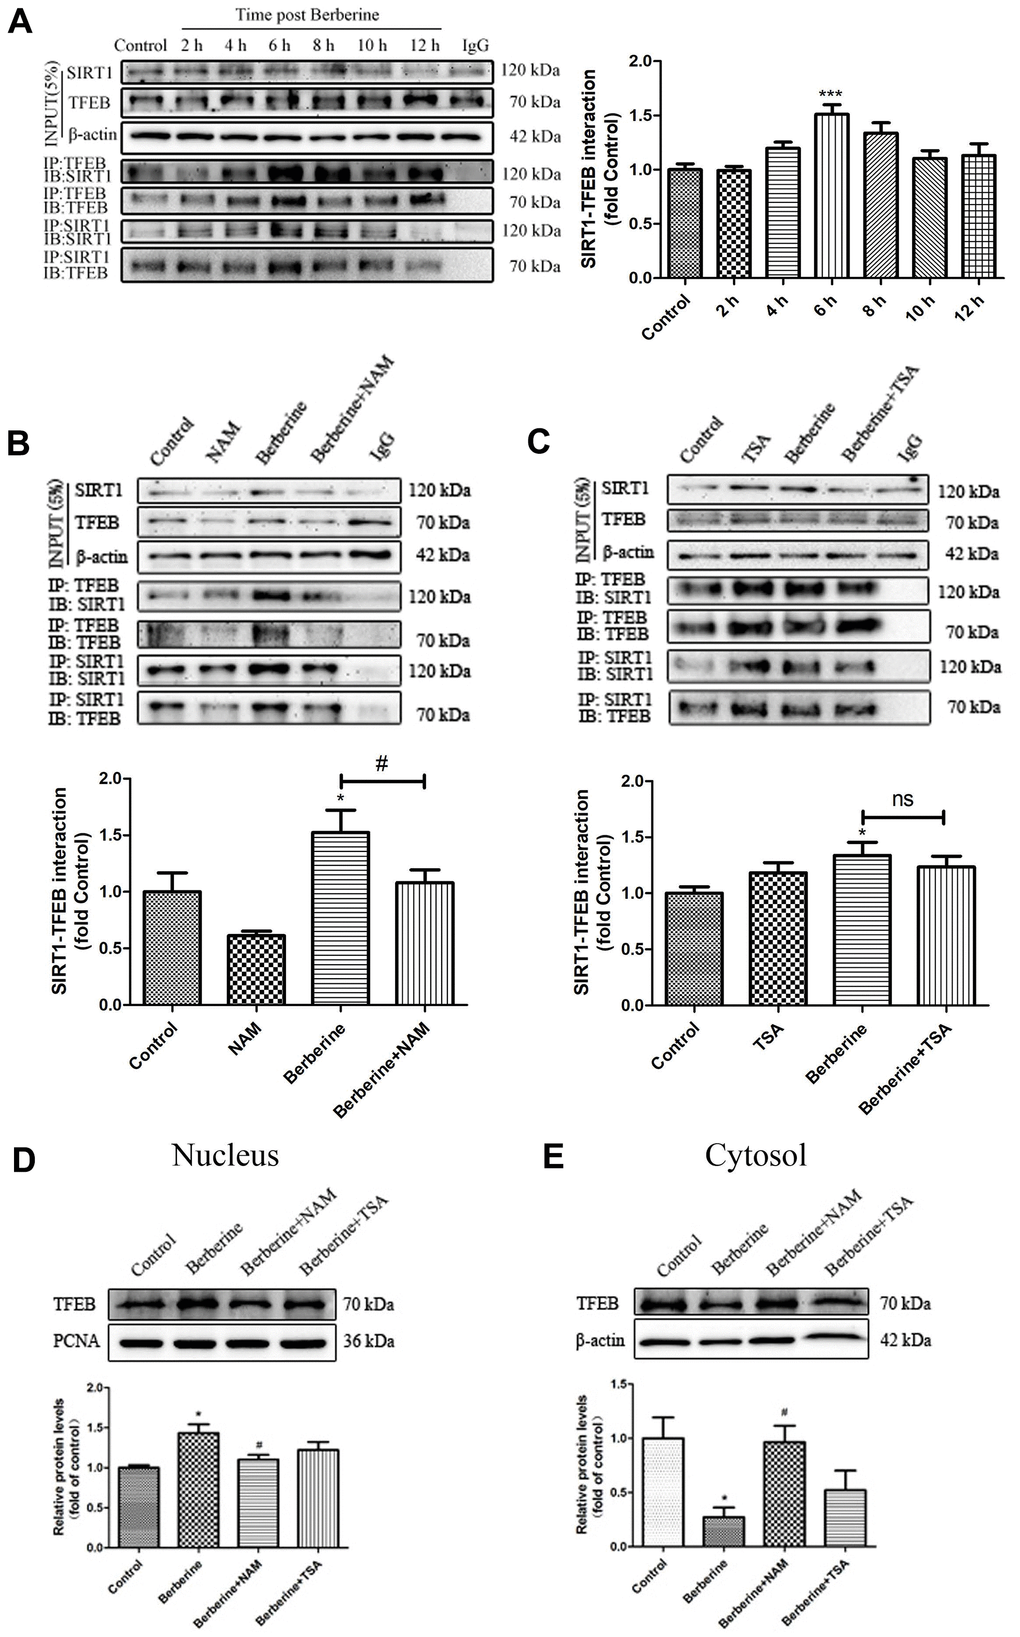 Berberine promotes the formation of SIRT1/TFEB complex. (A) Changes in the expression of SIRT1/TFEB complex in peritoneal macrophages at different incubation time points after treatment with 100 μmol/L berberine. Data was analyzed by one-way ANOVA with Tukey HSD post-hoc test (vs. Control group). (B) The effect of NAM on SIRT1/TFEB complex expression after treatment with 100 μmol/L berberine for 6 h. Data was analyzed by one-way ANOVA with Tukey HSD post-hoc test (vs. Control group). Analysis of variance and Student-Newman-Keuls post hoc tests were used to compare two group (vs. berberine group). (C) The effect of TSA on SIRT1/TFEB complex after treatment with 100 μmol/L berberine for 6h. Data was analyzed by one-way ANOVA with Tukey HSD post-hoc test (vs. Control group). Analysis of variance and Student-Newman-Keuls post hoc tests were used to compare two group (vs. berberine group). (D, E) The effects of NAM and TSA on TFEB translocation in peritoneal macrophages at 6 h after treatment with 100 μmol/L berberine. Data was analyzed by one-way ANOVA with Tukey HSD post-hoc test (vs. Control group). Analysis of variance and Student-Newman-Keuls post hoc tests were used to compare two group (vs. berberine group). All values are expressed as mean ± SD (error bars) of three independent experiments. n = 3; *p #p 